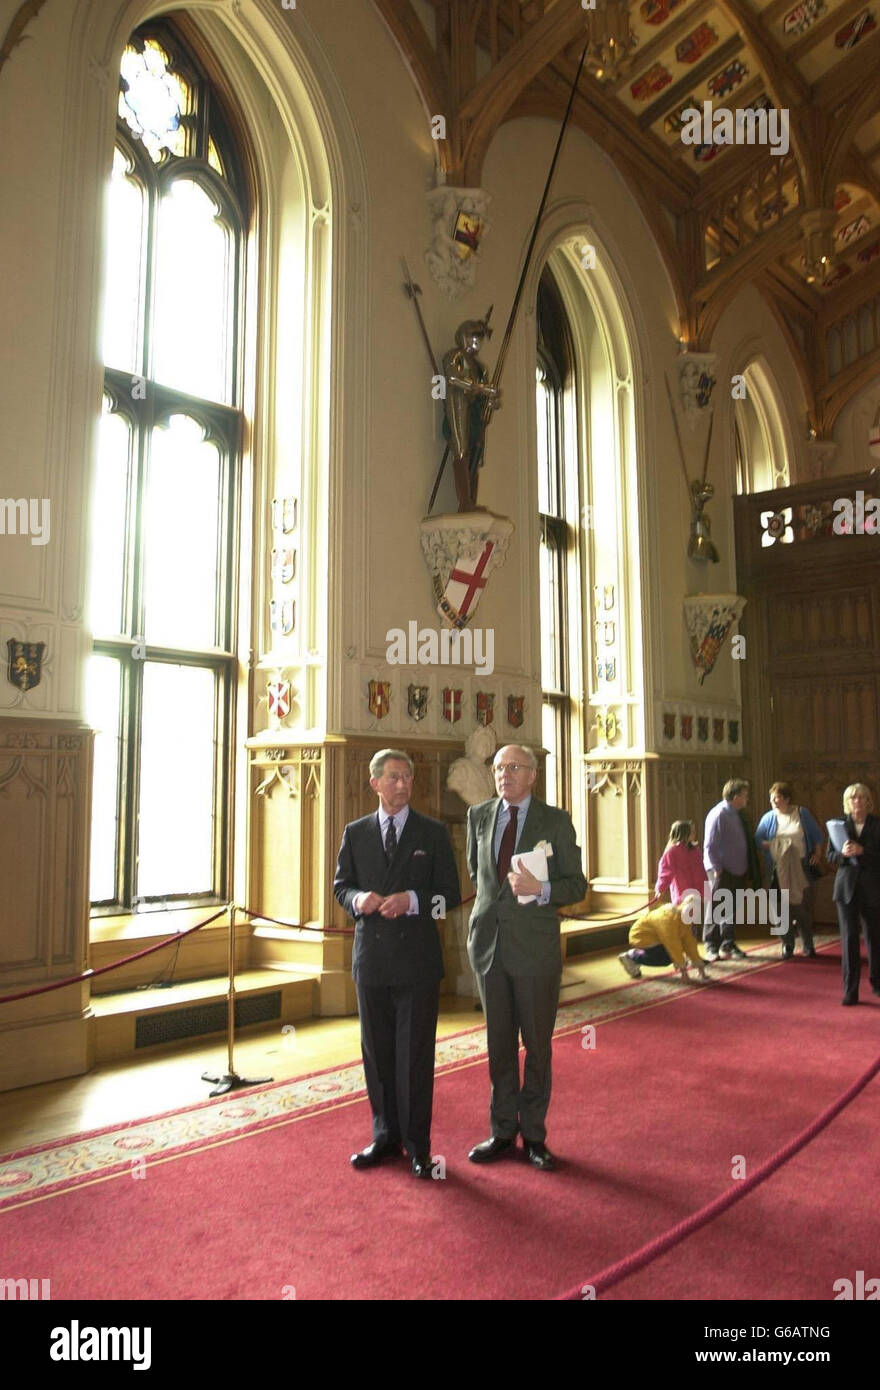 The prince of Wales in Windsor Castle's St George's Hall with Sir Hugh Roberts, director of the Royal Collection, during a tour of the castle's public areas. In a bid to boost tourism, the heir to the throne took the tour of his mother's Castle with travel executives. Stock Photo